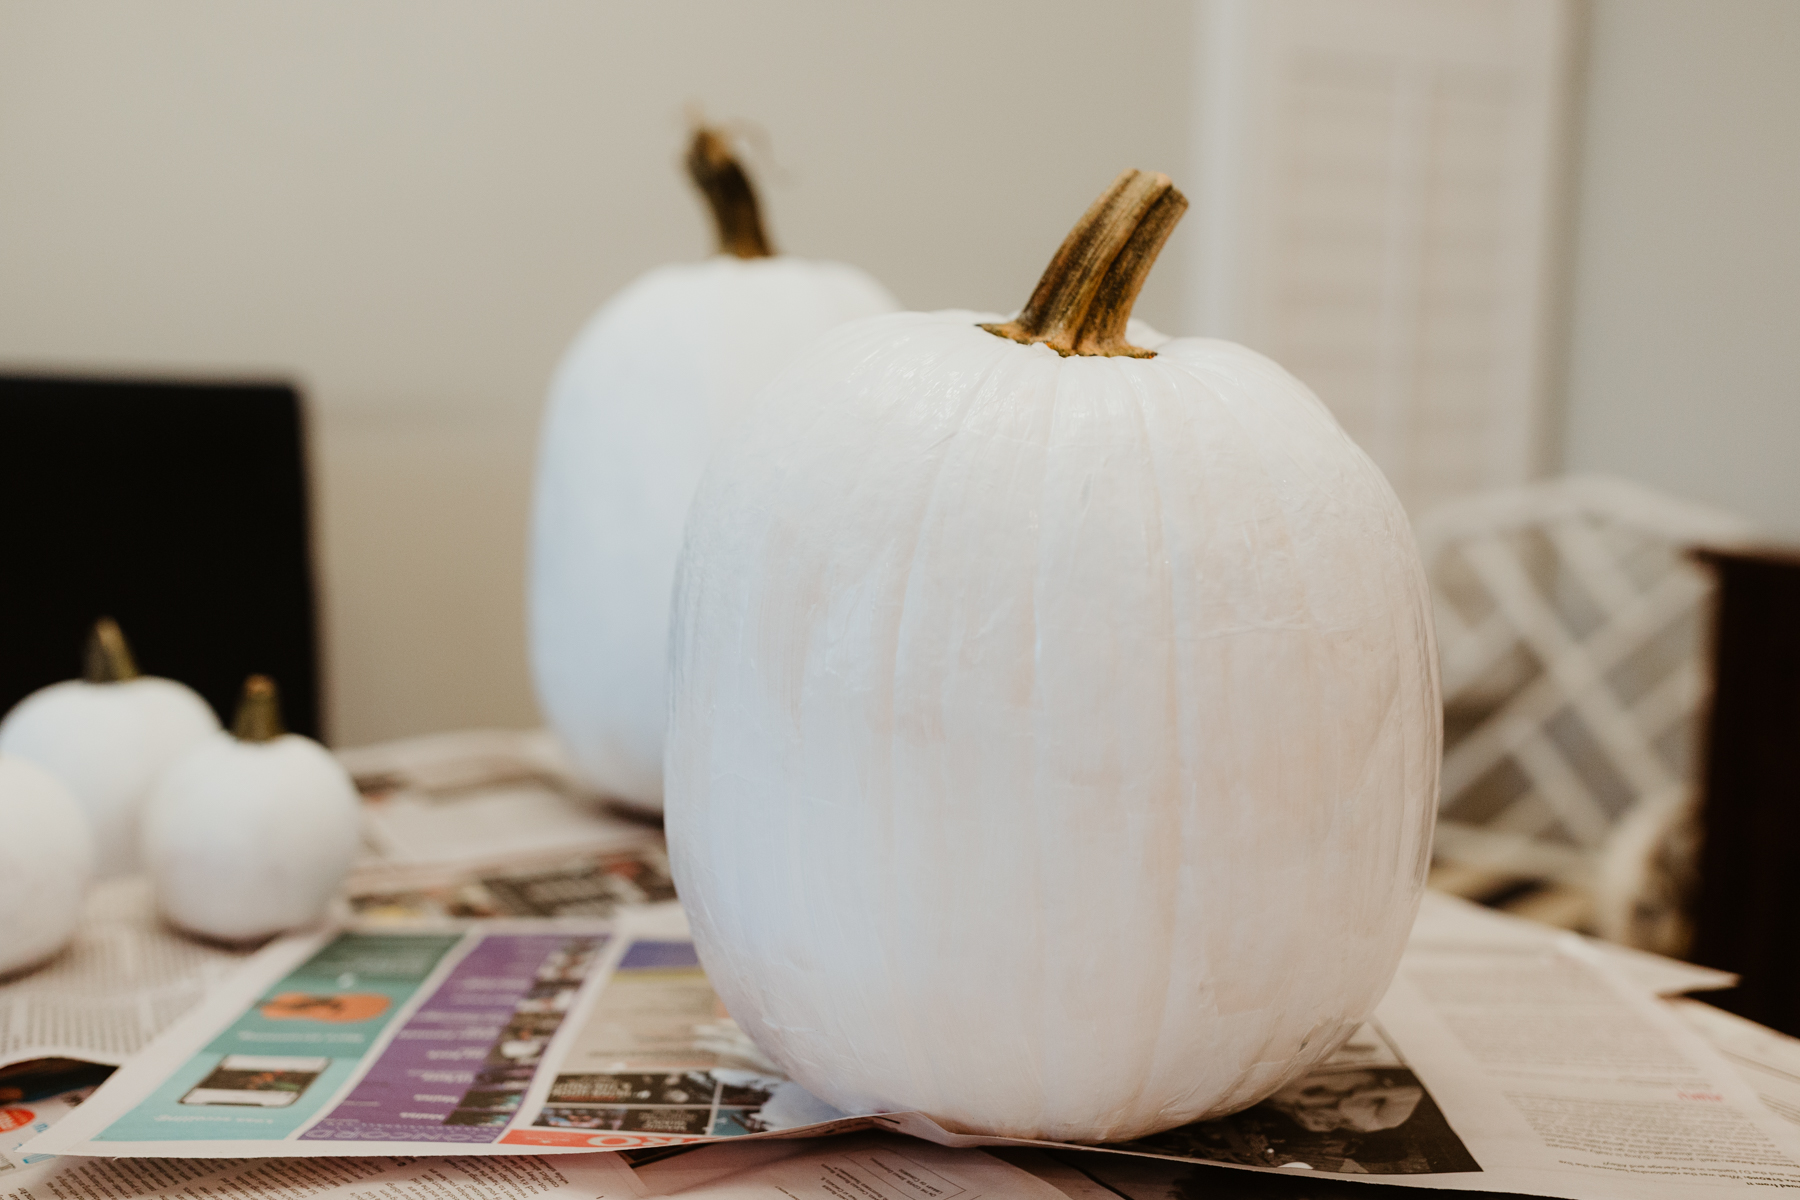 Buffalo plaid pumpkin: Start by painting the pumpkin white. We used acrylic paint we found on Amazon.